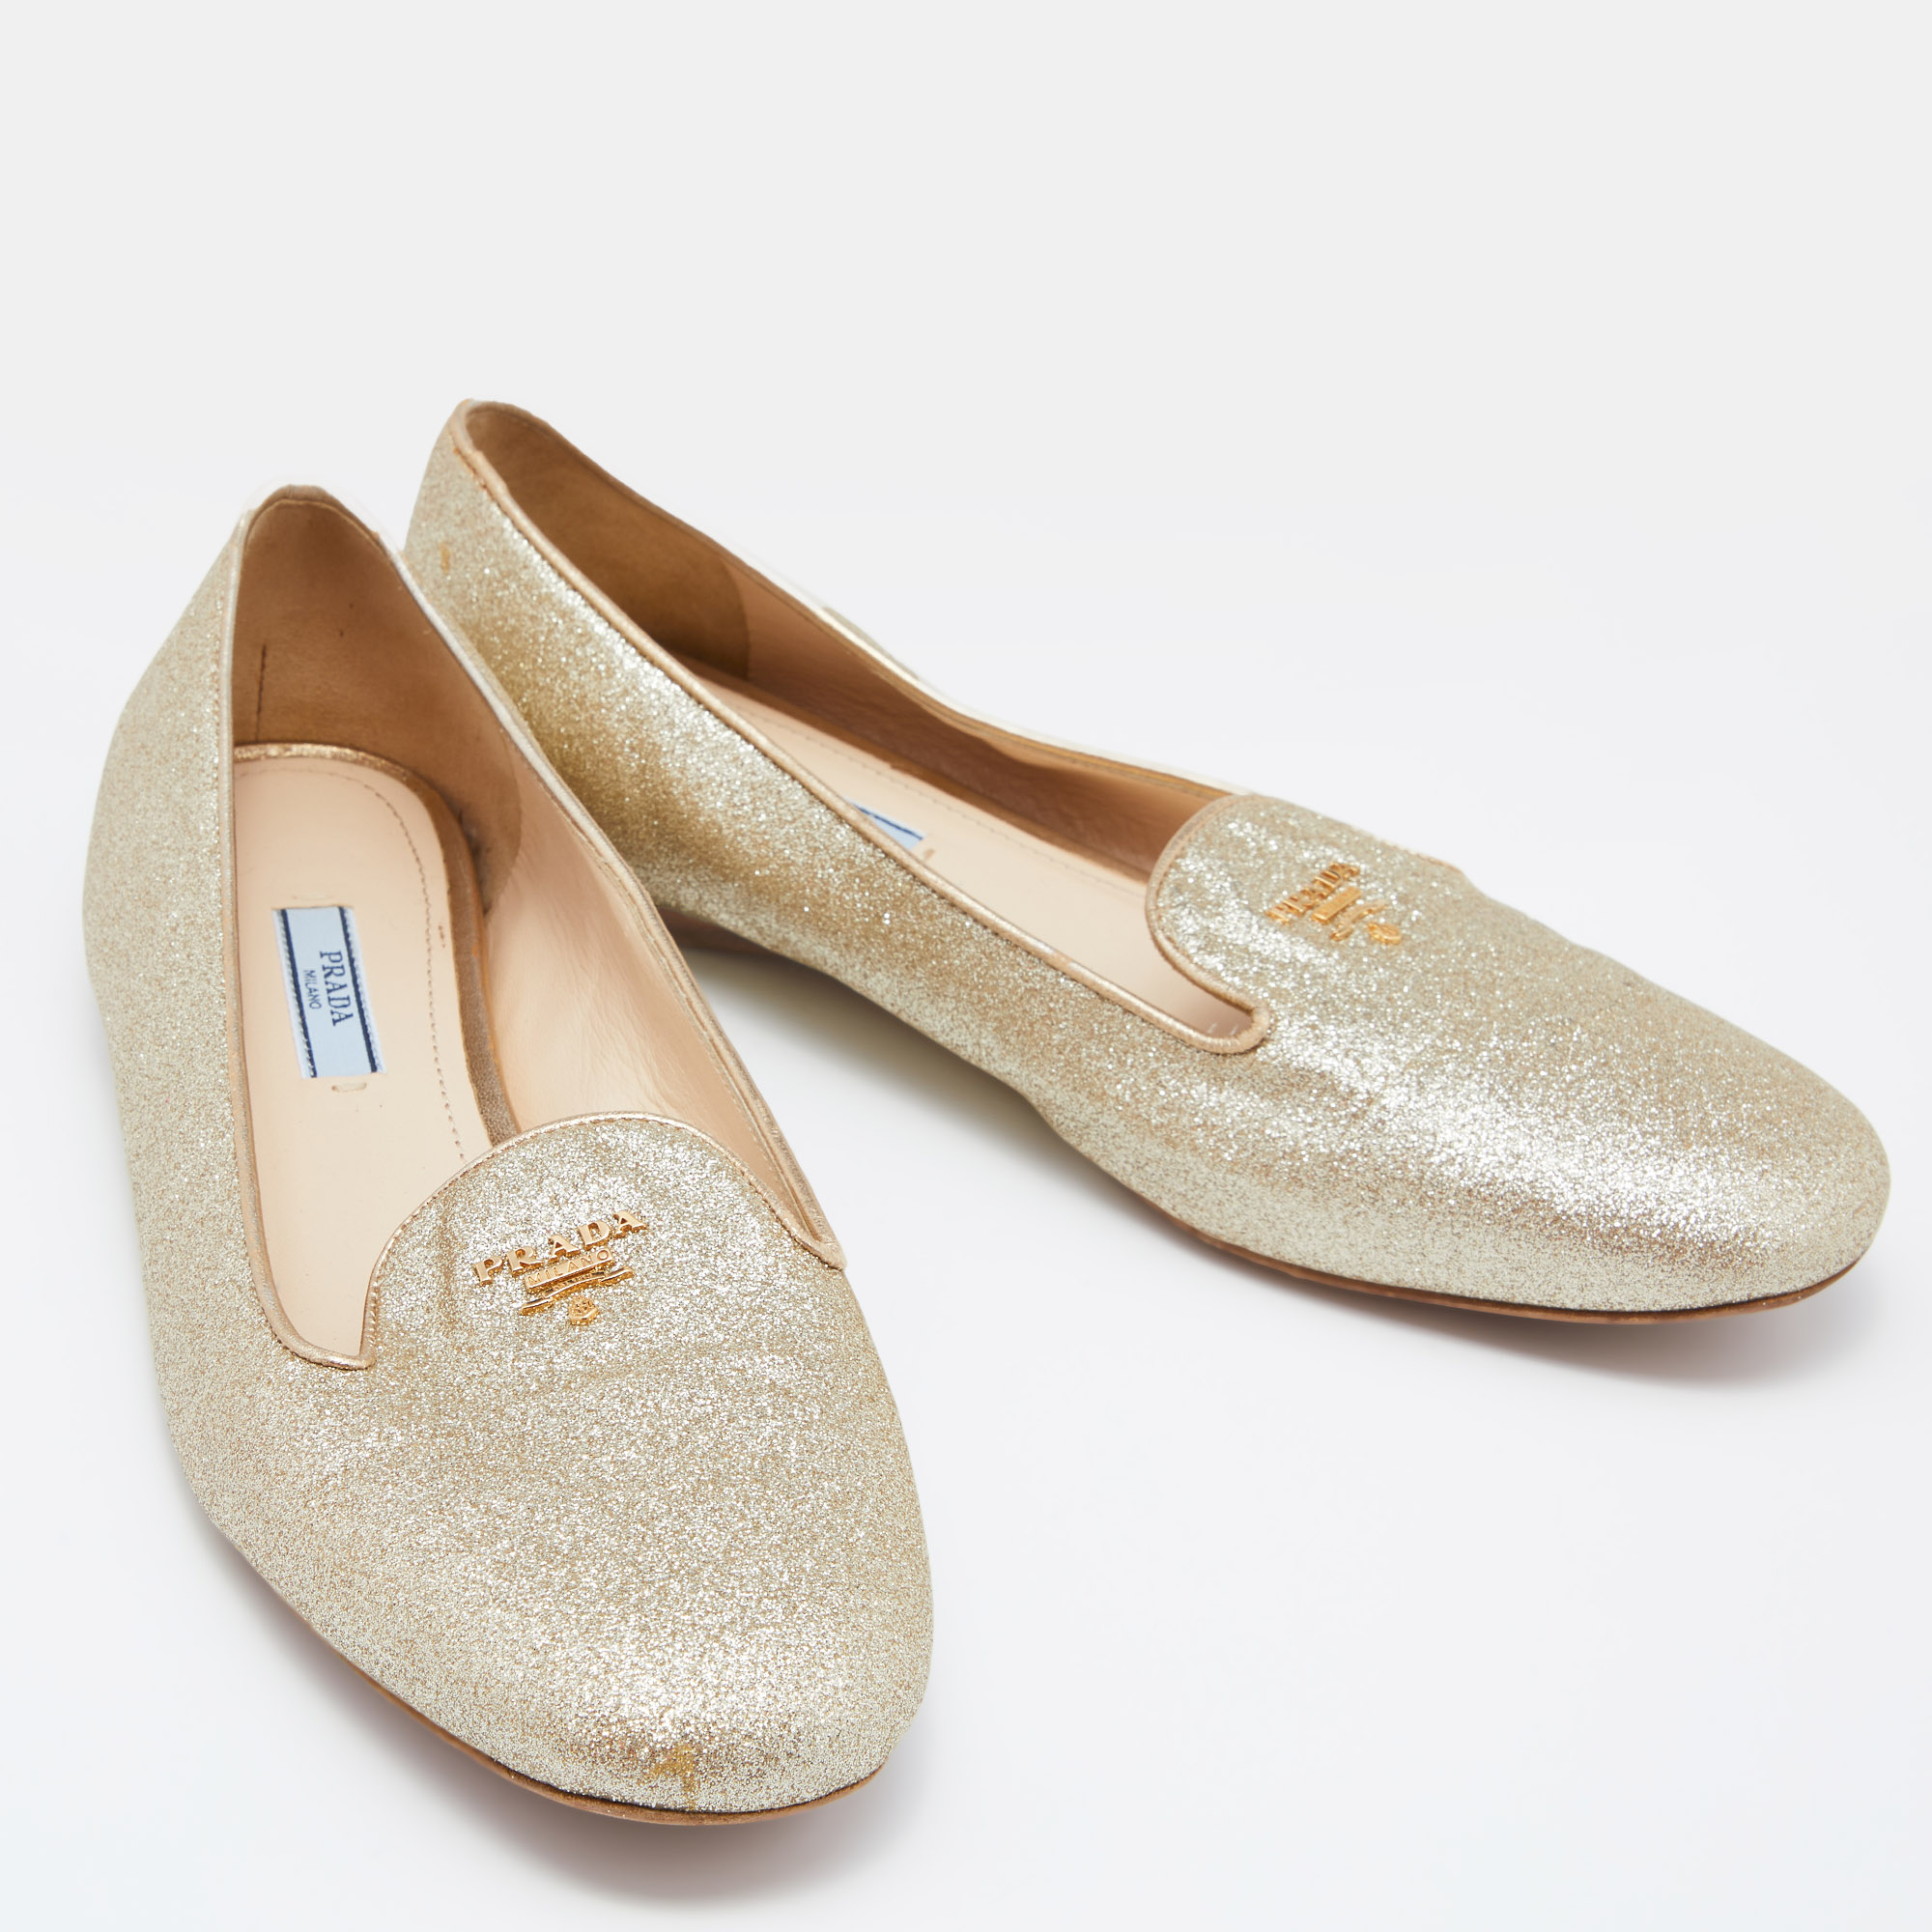 Prada Gold Glitter And Leather Smoking Slippers Size 40